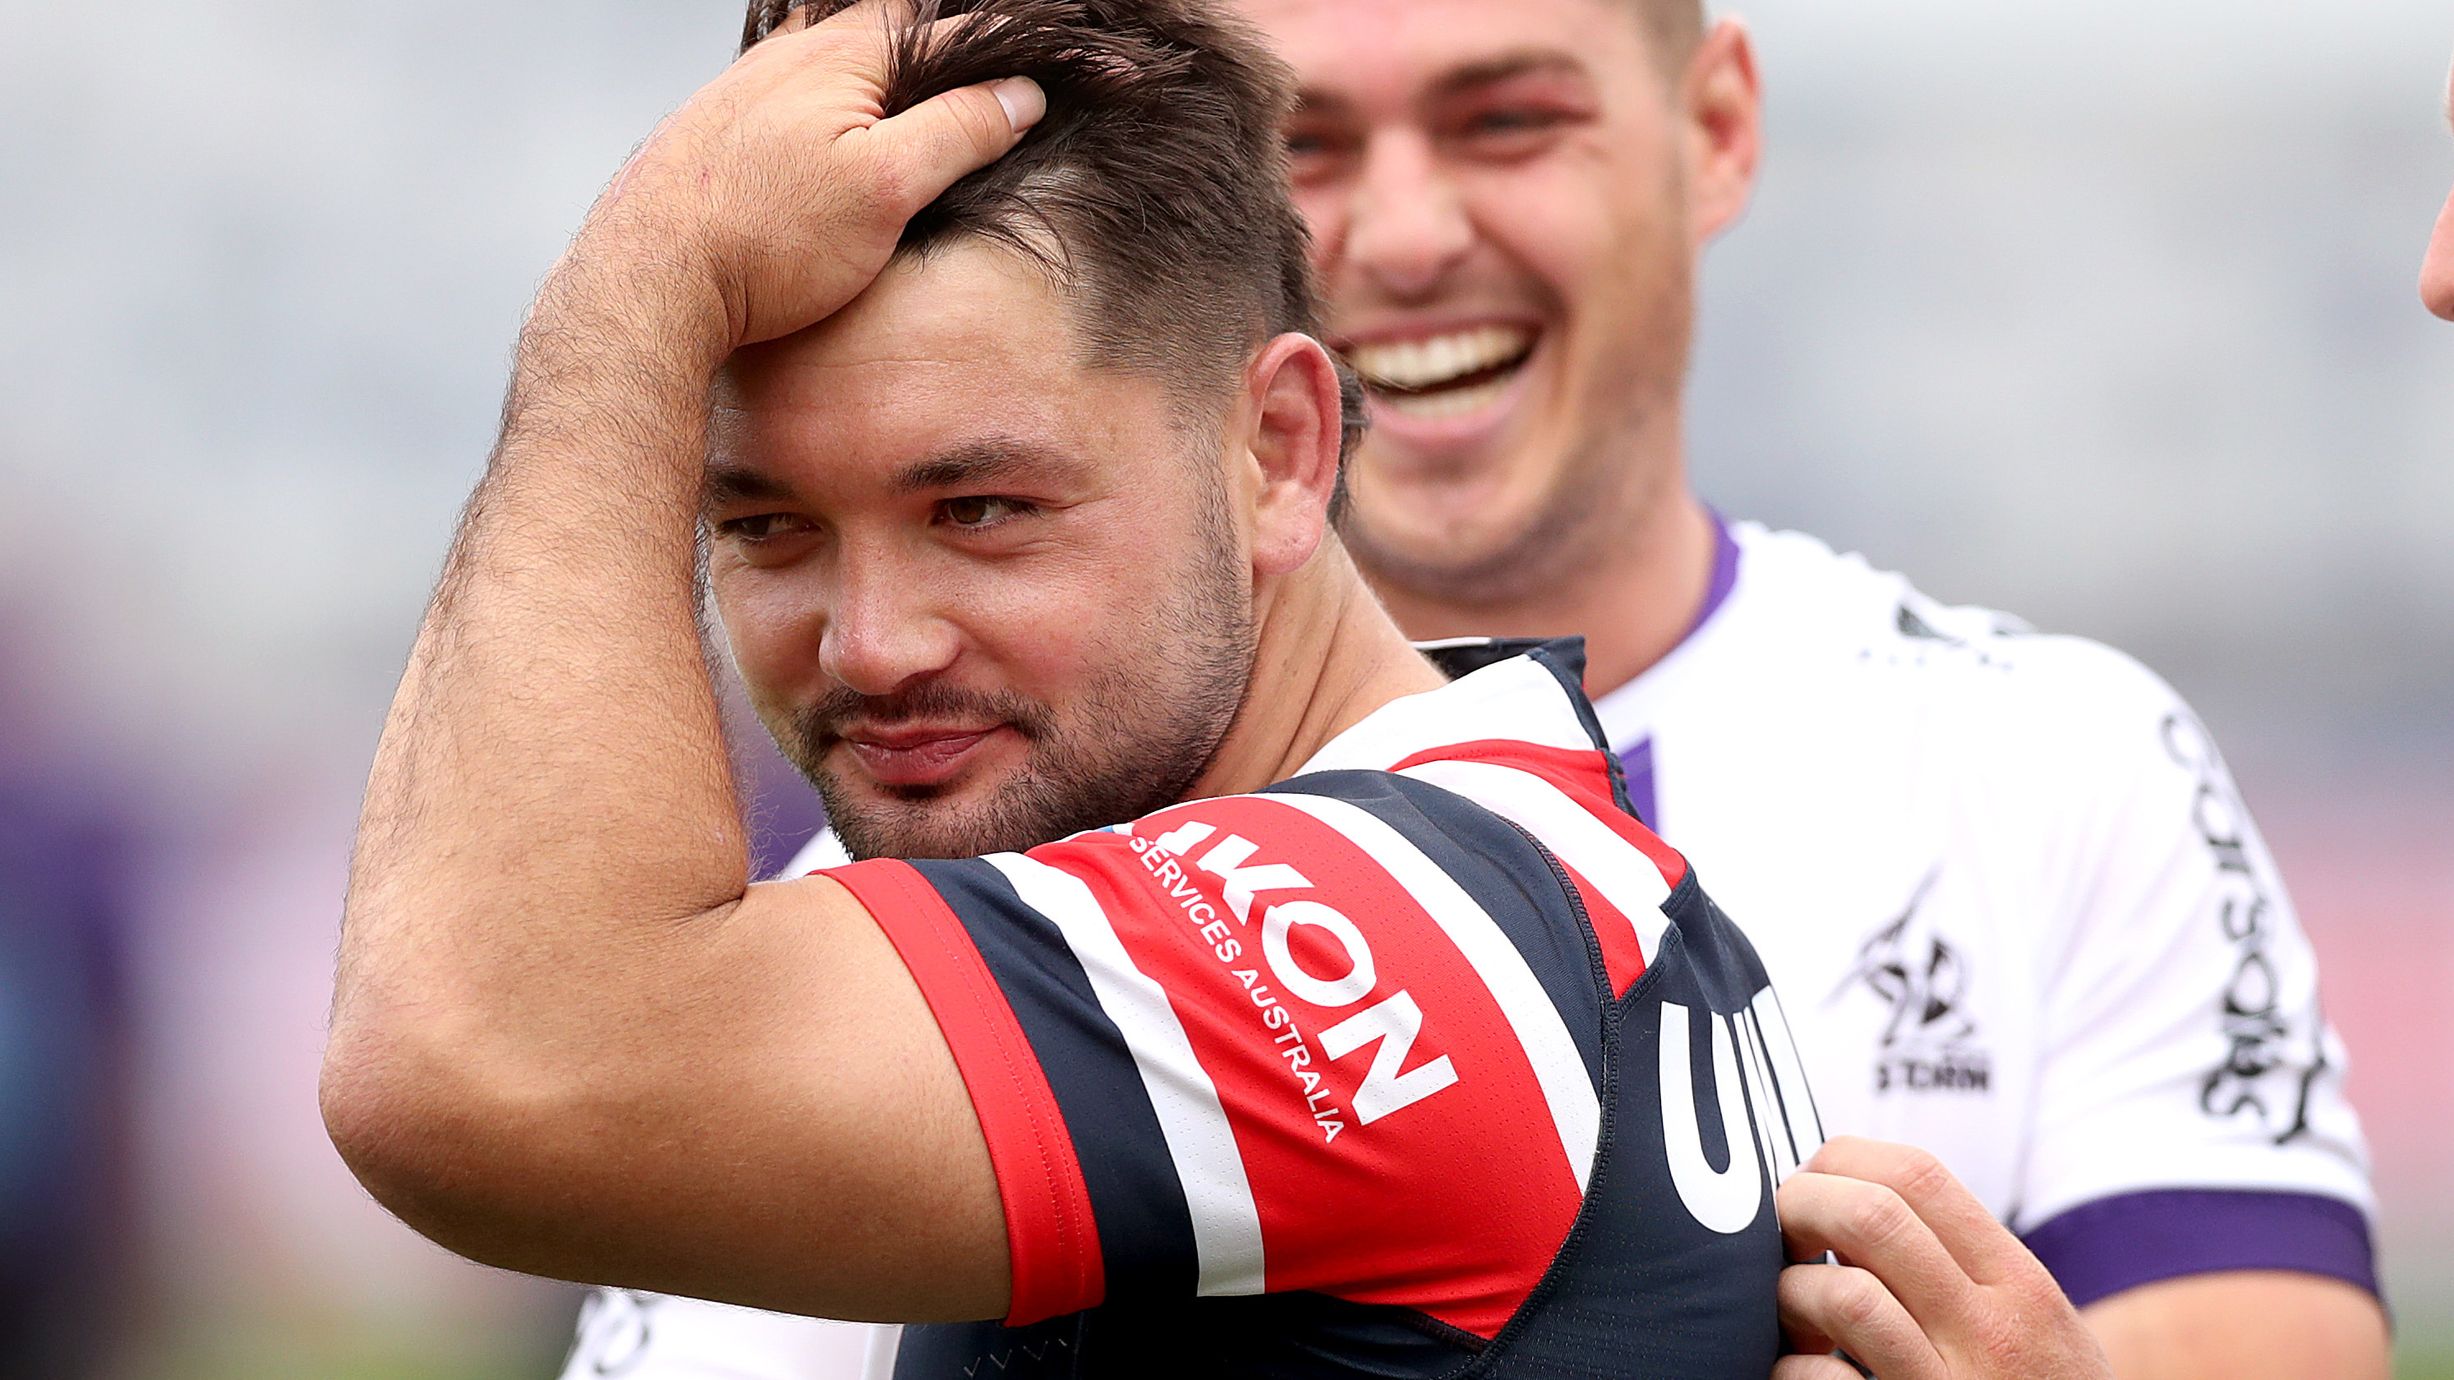  Brandon Smith of Roosters speaks to former Storm team mates during the NRL Trial match between Melbourne Storm and Sydney Roosters at GMHBA Stadium on February 12, 2023 in Geelong, Australia. (Photo by Kelly Defina/Getty Images)